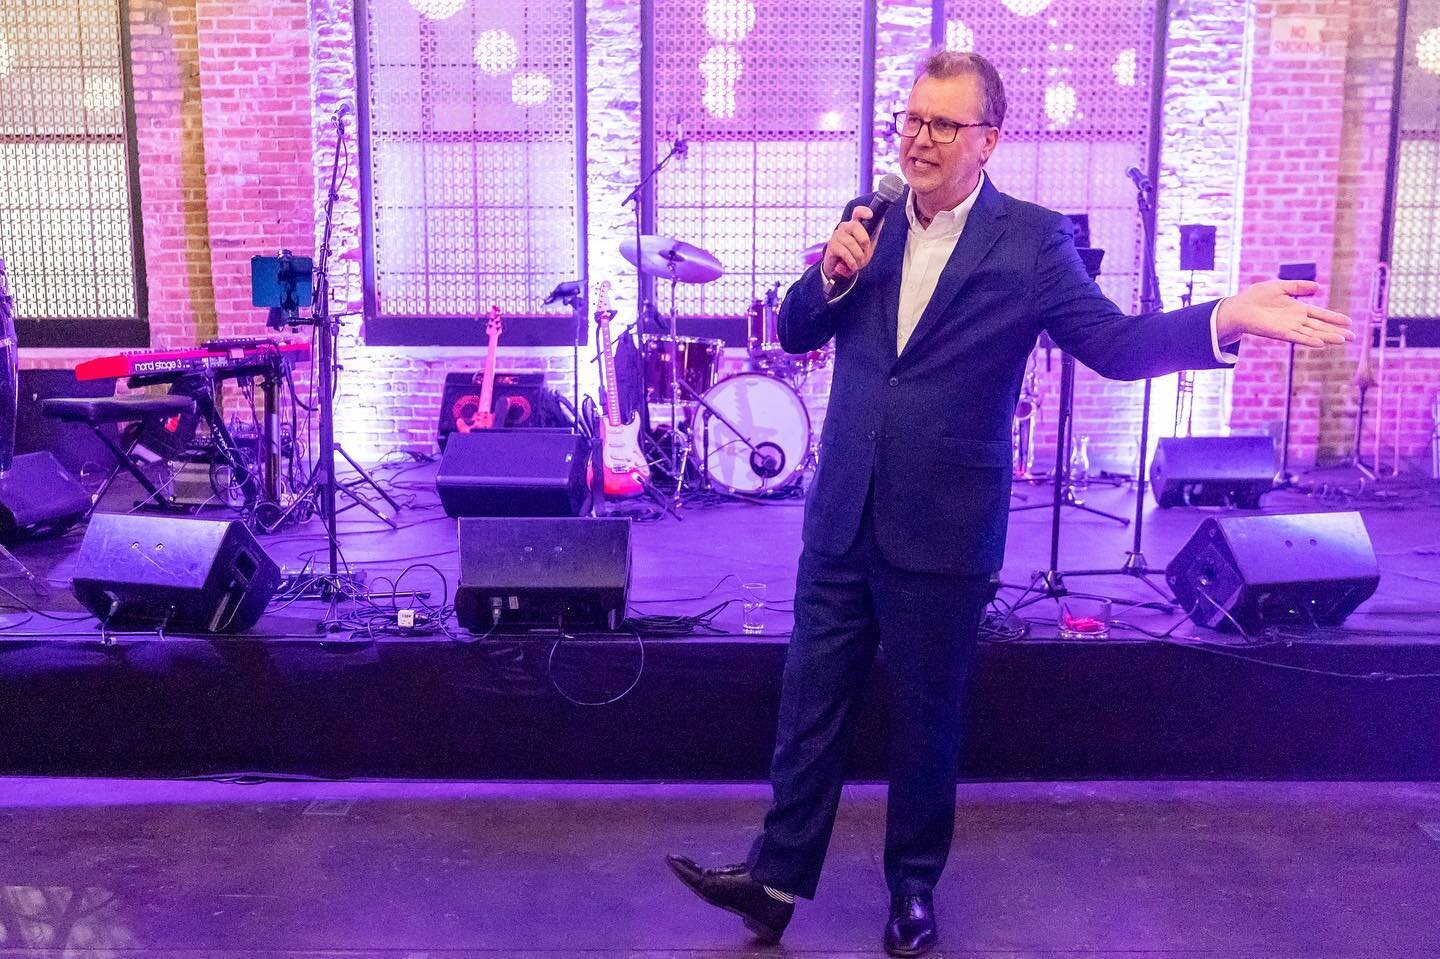 Giving the new suit a shakedown.  Thanks for the 📸 @shayjamesphotography 🤪 #CharityAuctions #CharityAuctioneer